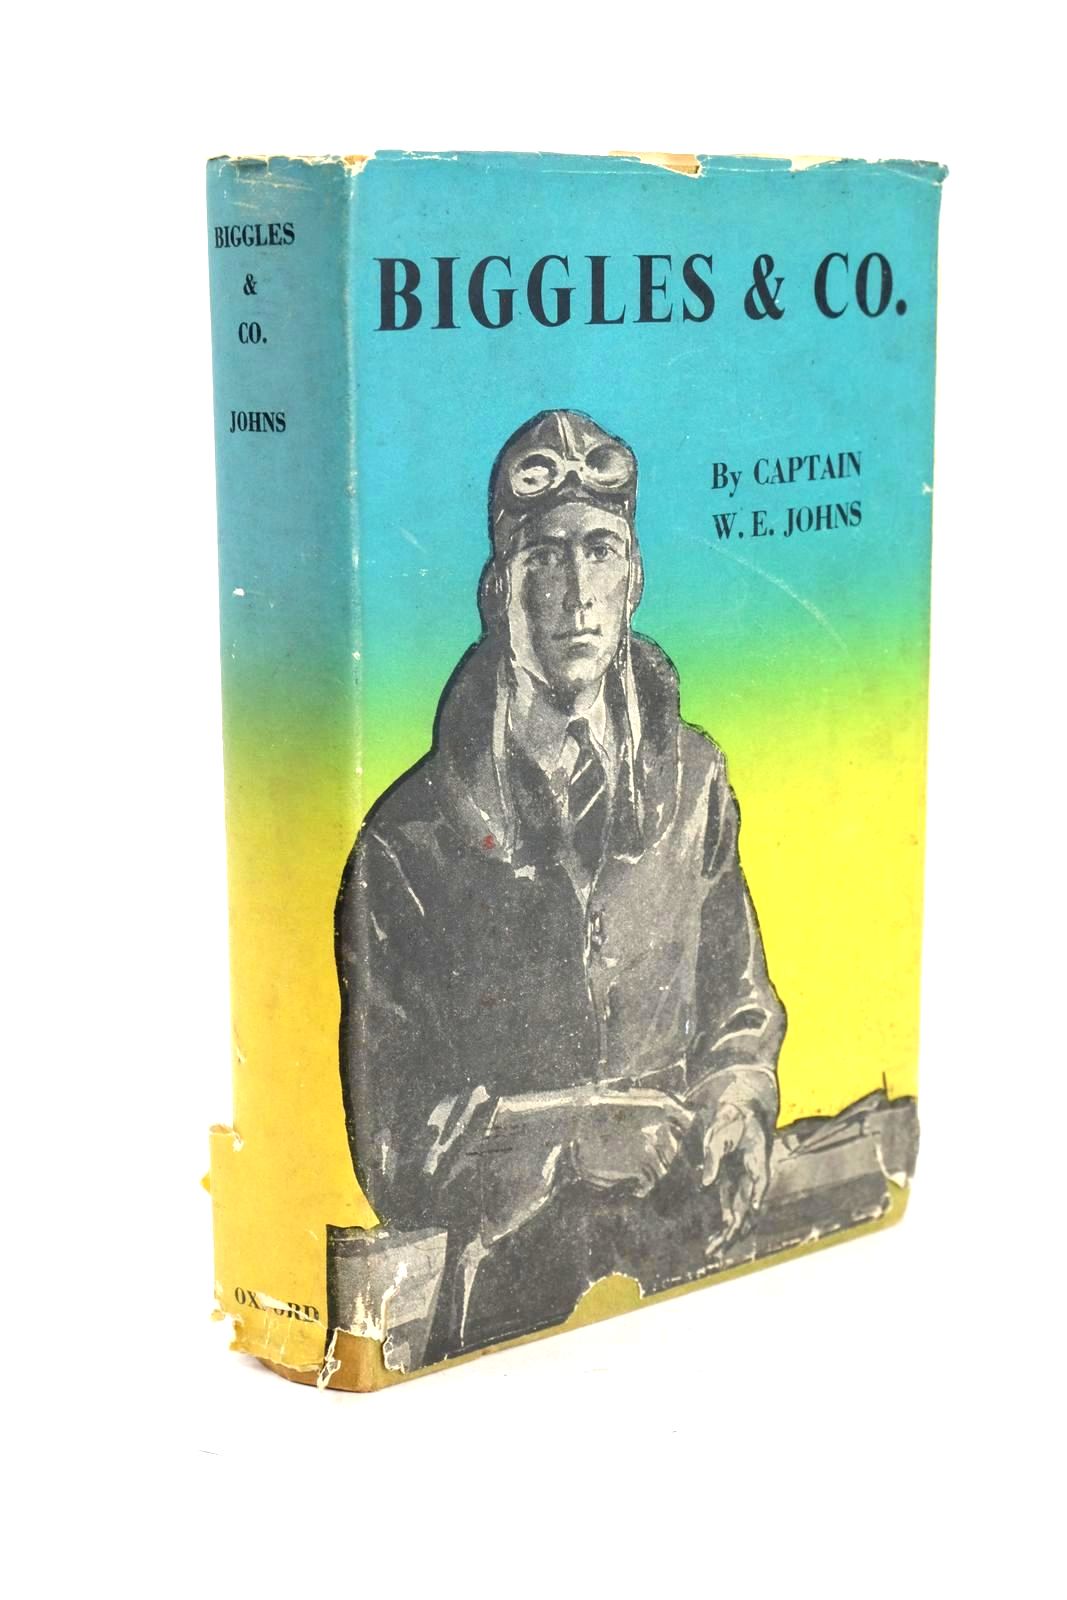 Photo of BIGGLES & CO. written by Johns, W.E. illustrated by Sindall, Alfred published by Oxford University Press, Geoffrey Cumberlege (STOCK CODE: 1326368)  for sale by Stella & Rose's Books